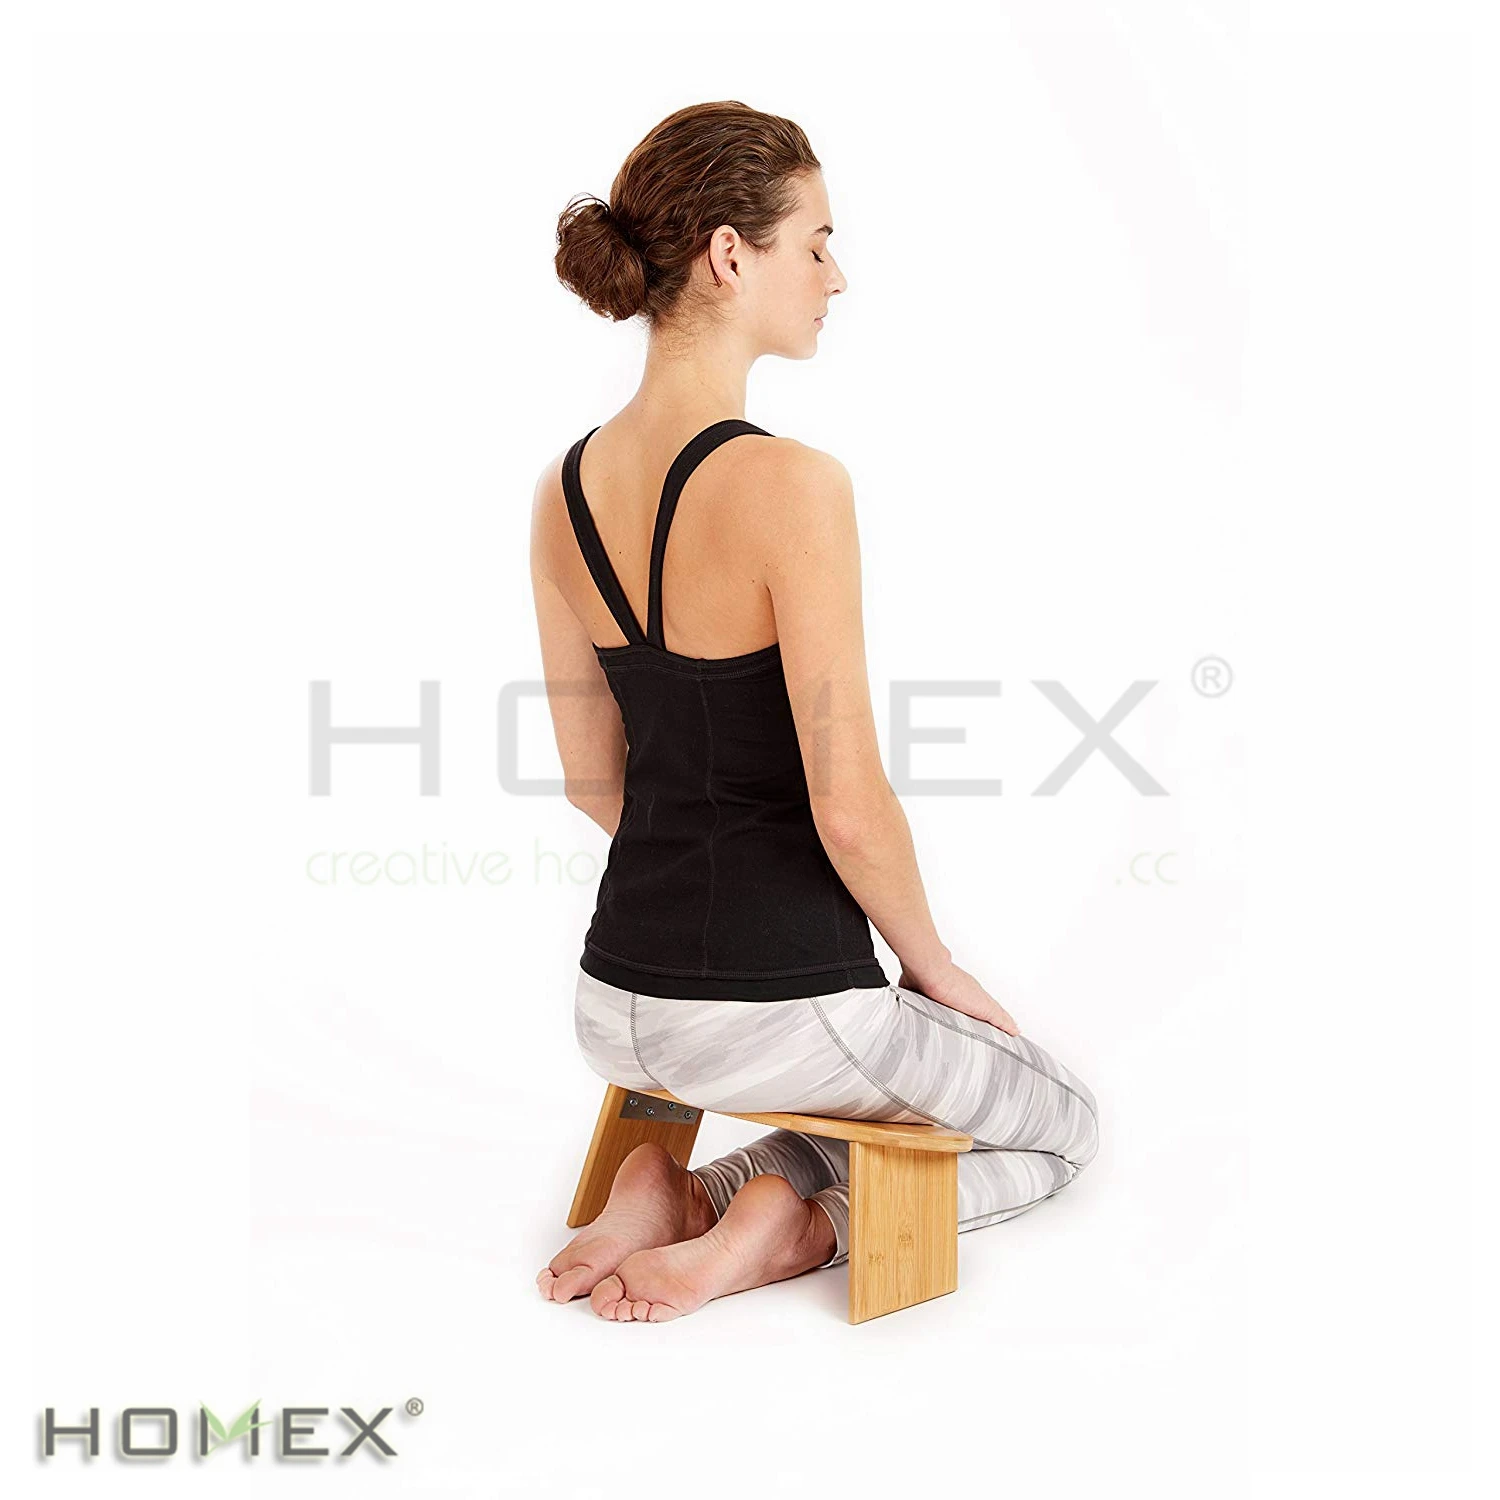 Homex Amazon Top Seller Bamboo Yoga Meditation Stool Bench Seiza Bench with Foldable Legs